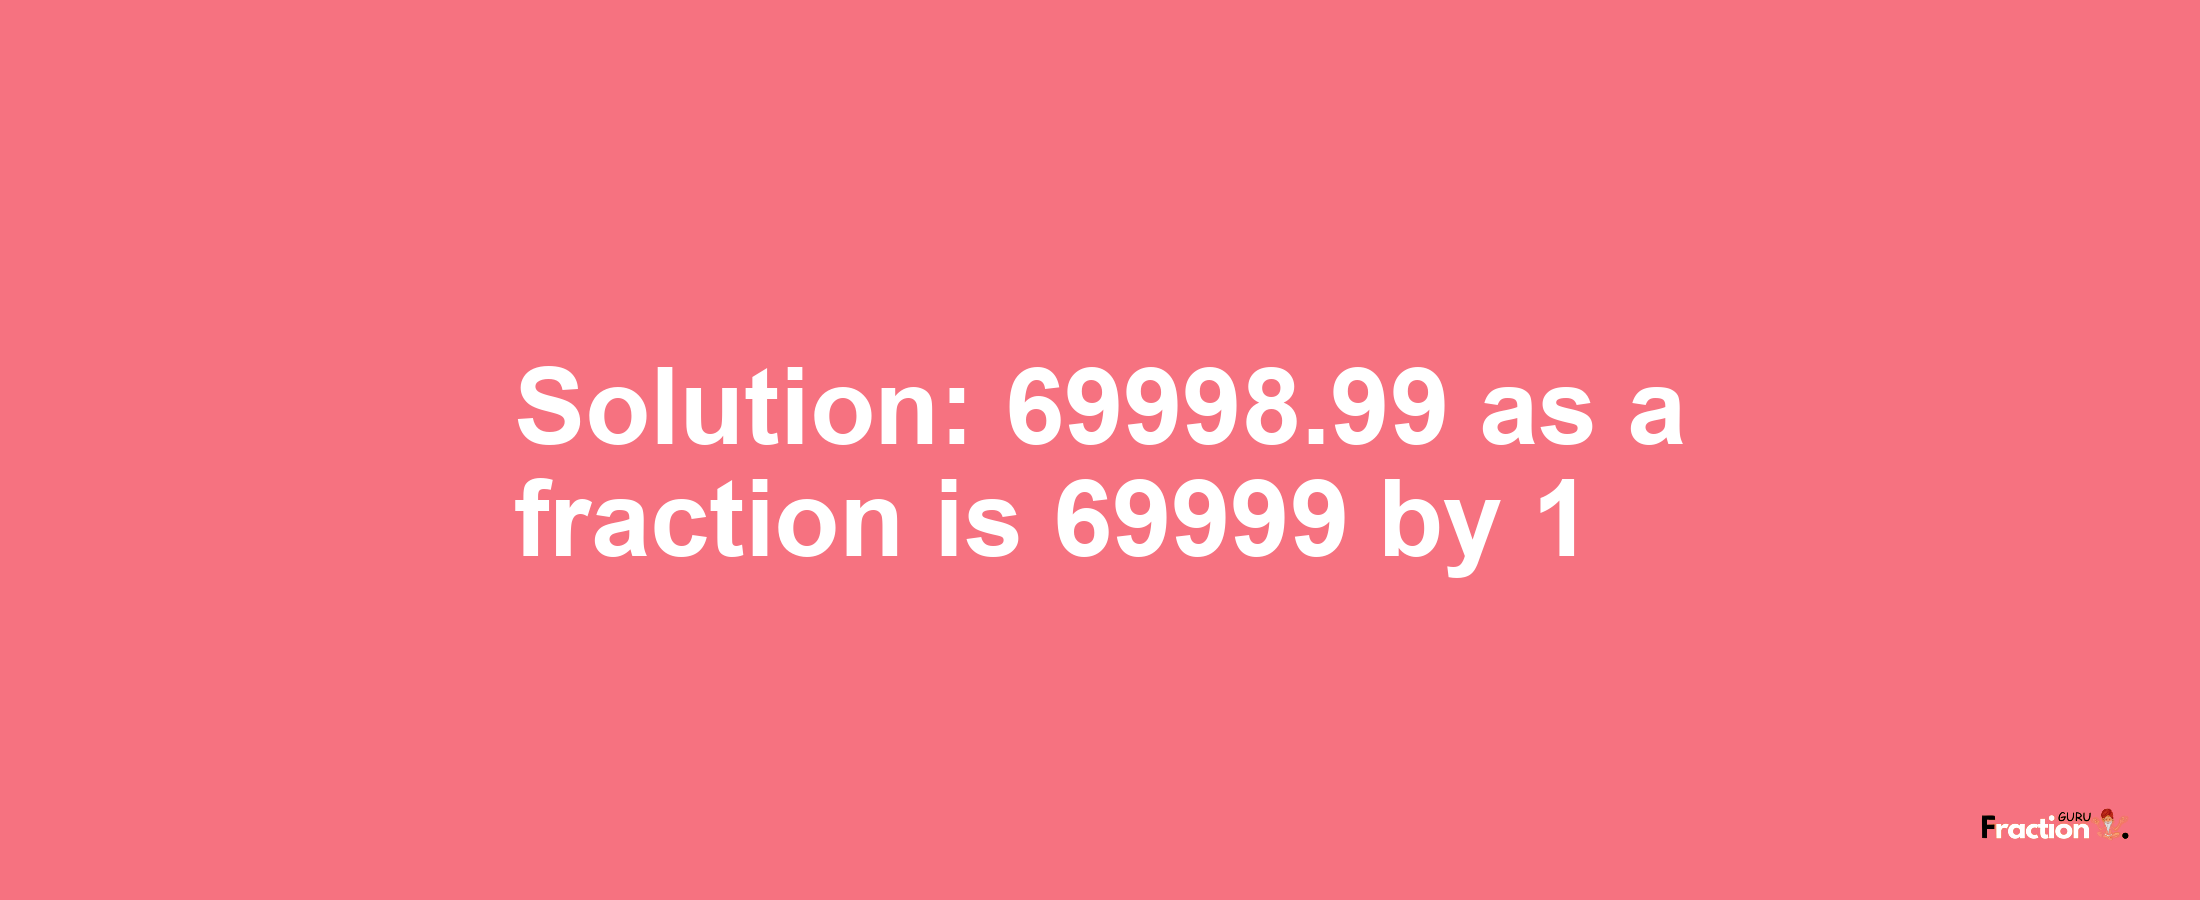 Solution:69998.99 as a fraction is 69999/1